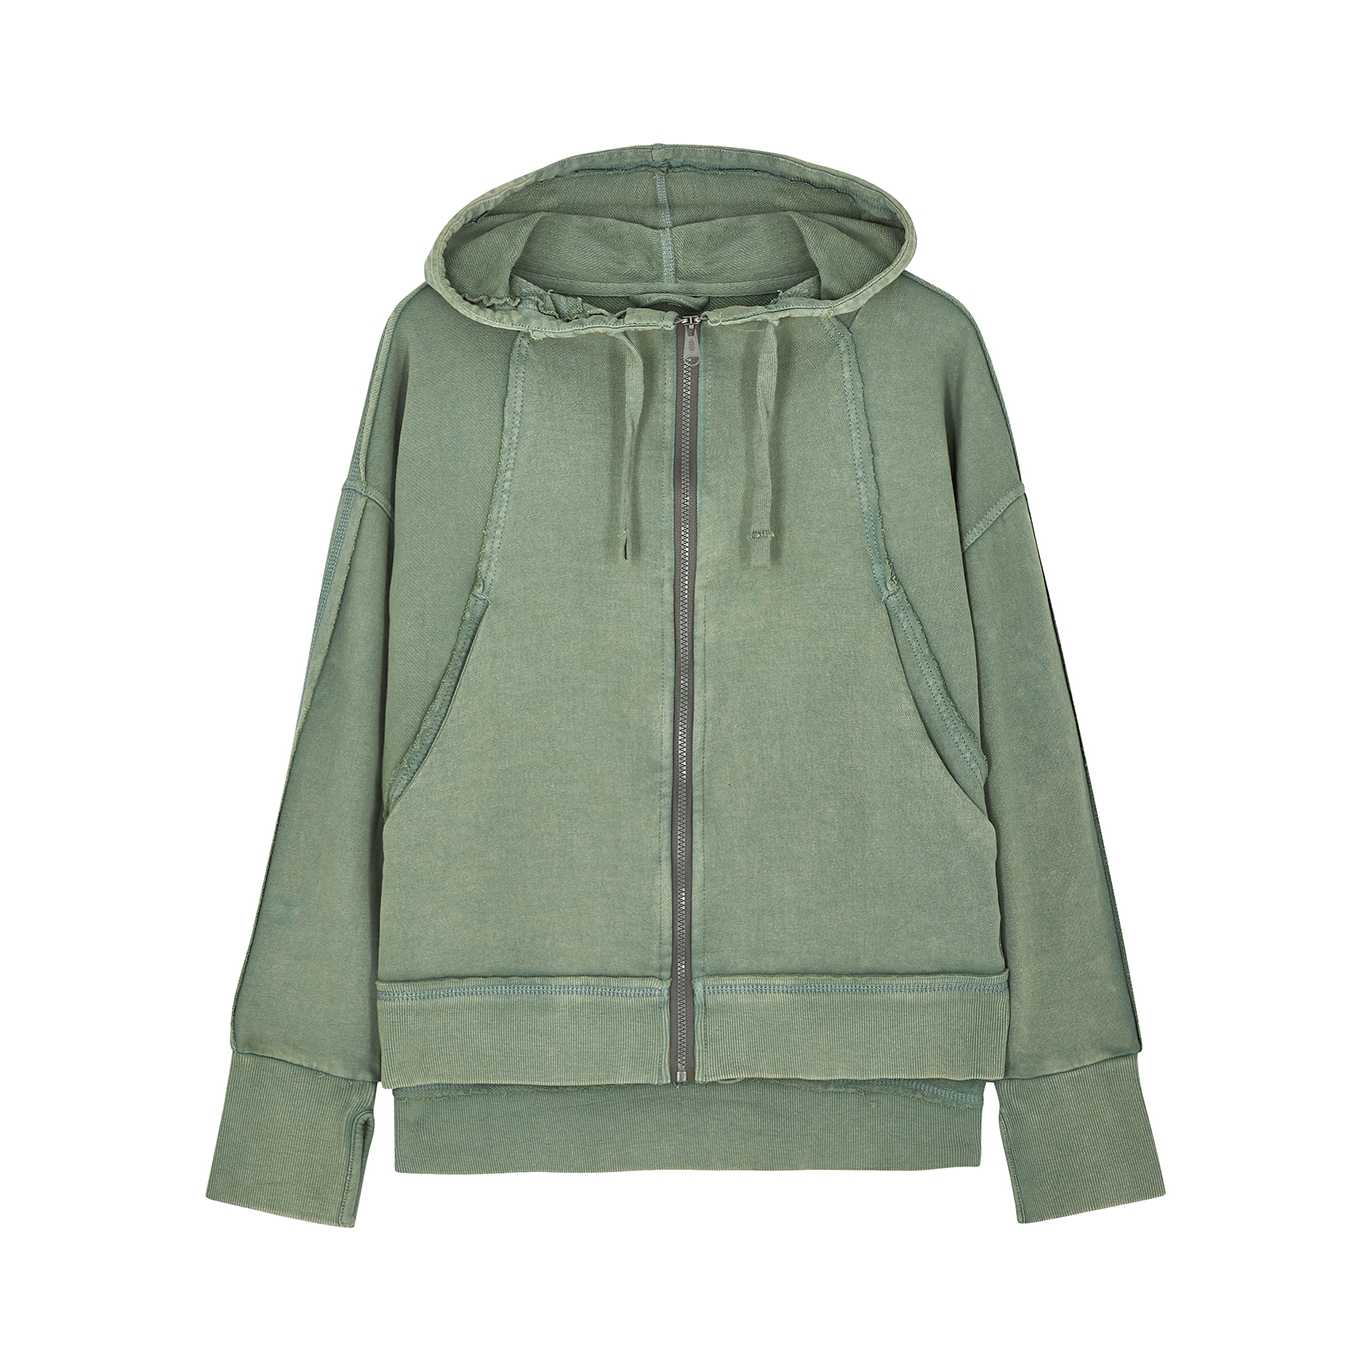 Free People Movement Only One Green Hooded Cotton Sweatshirt - Dark Green - XS